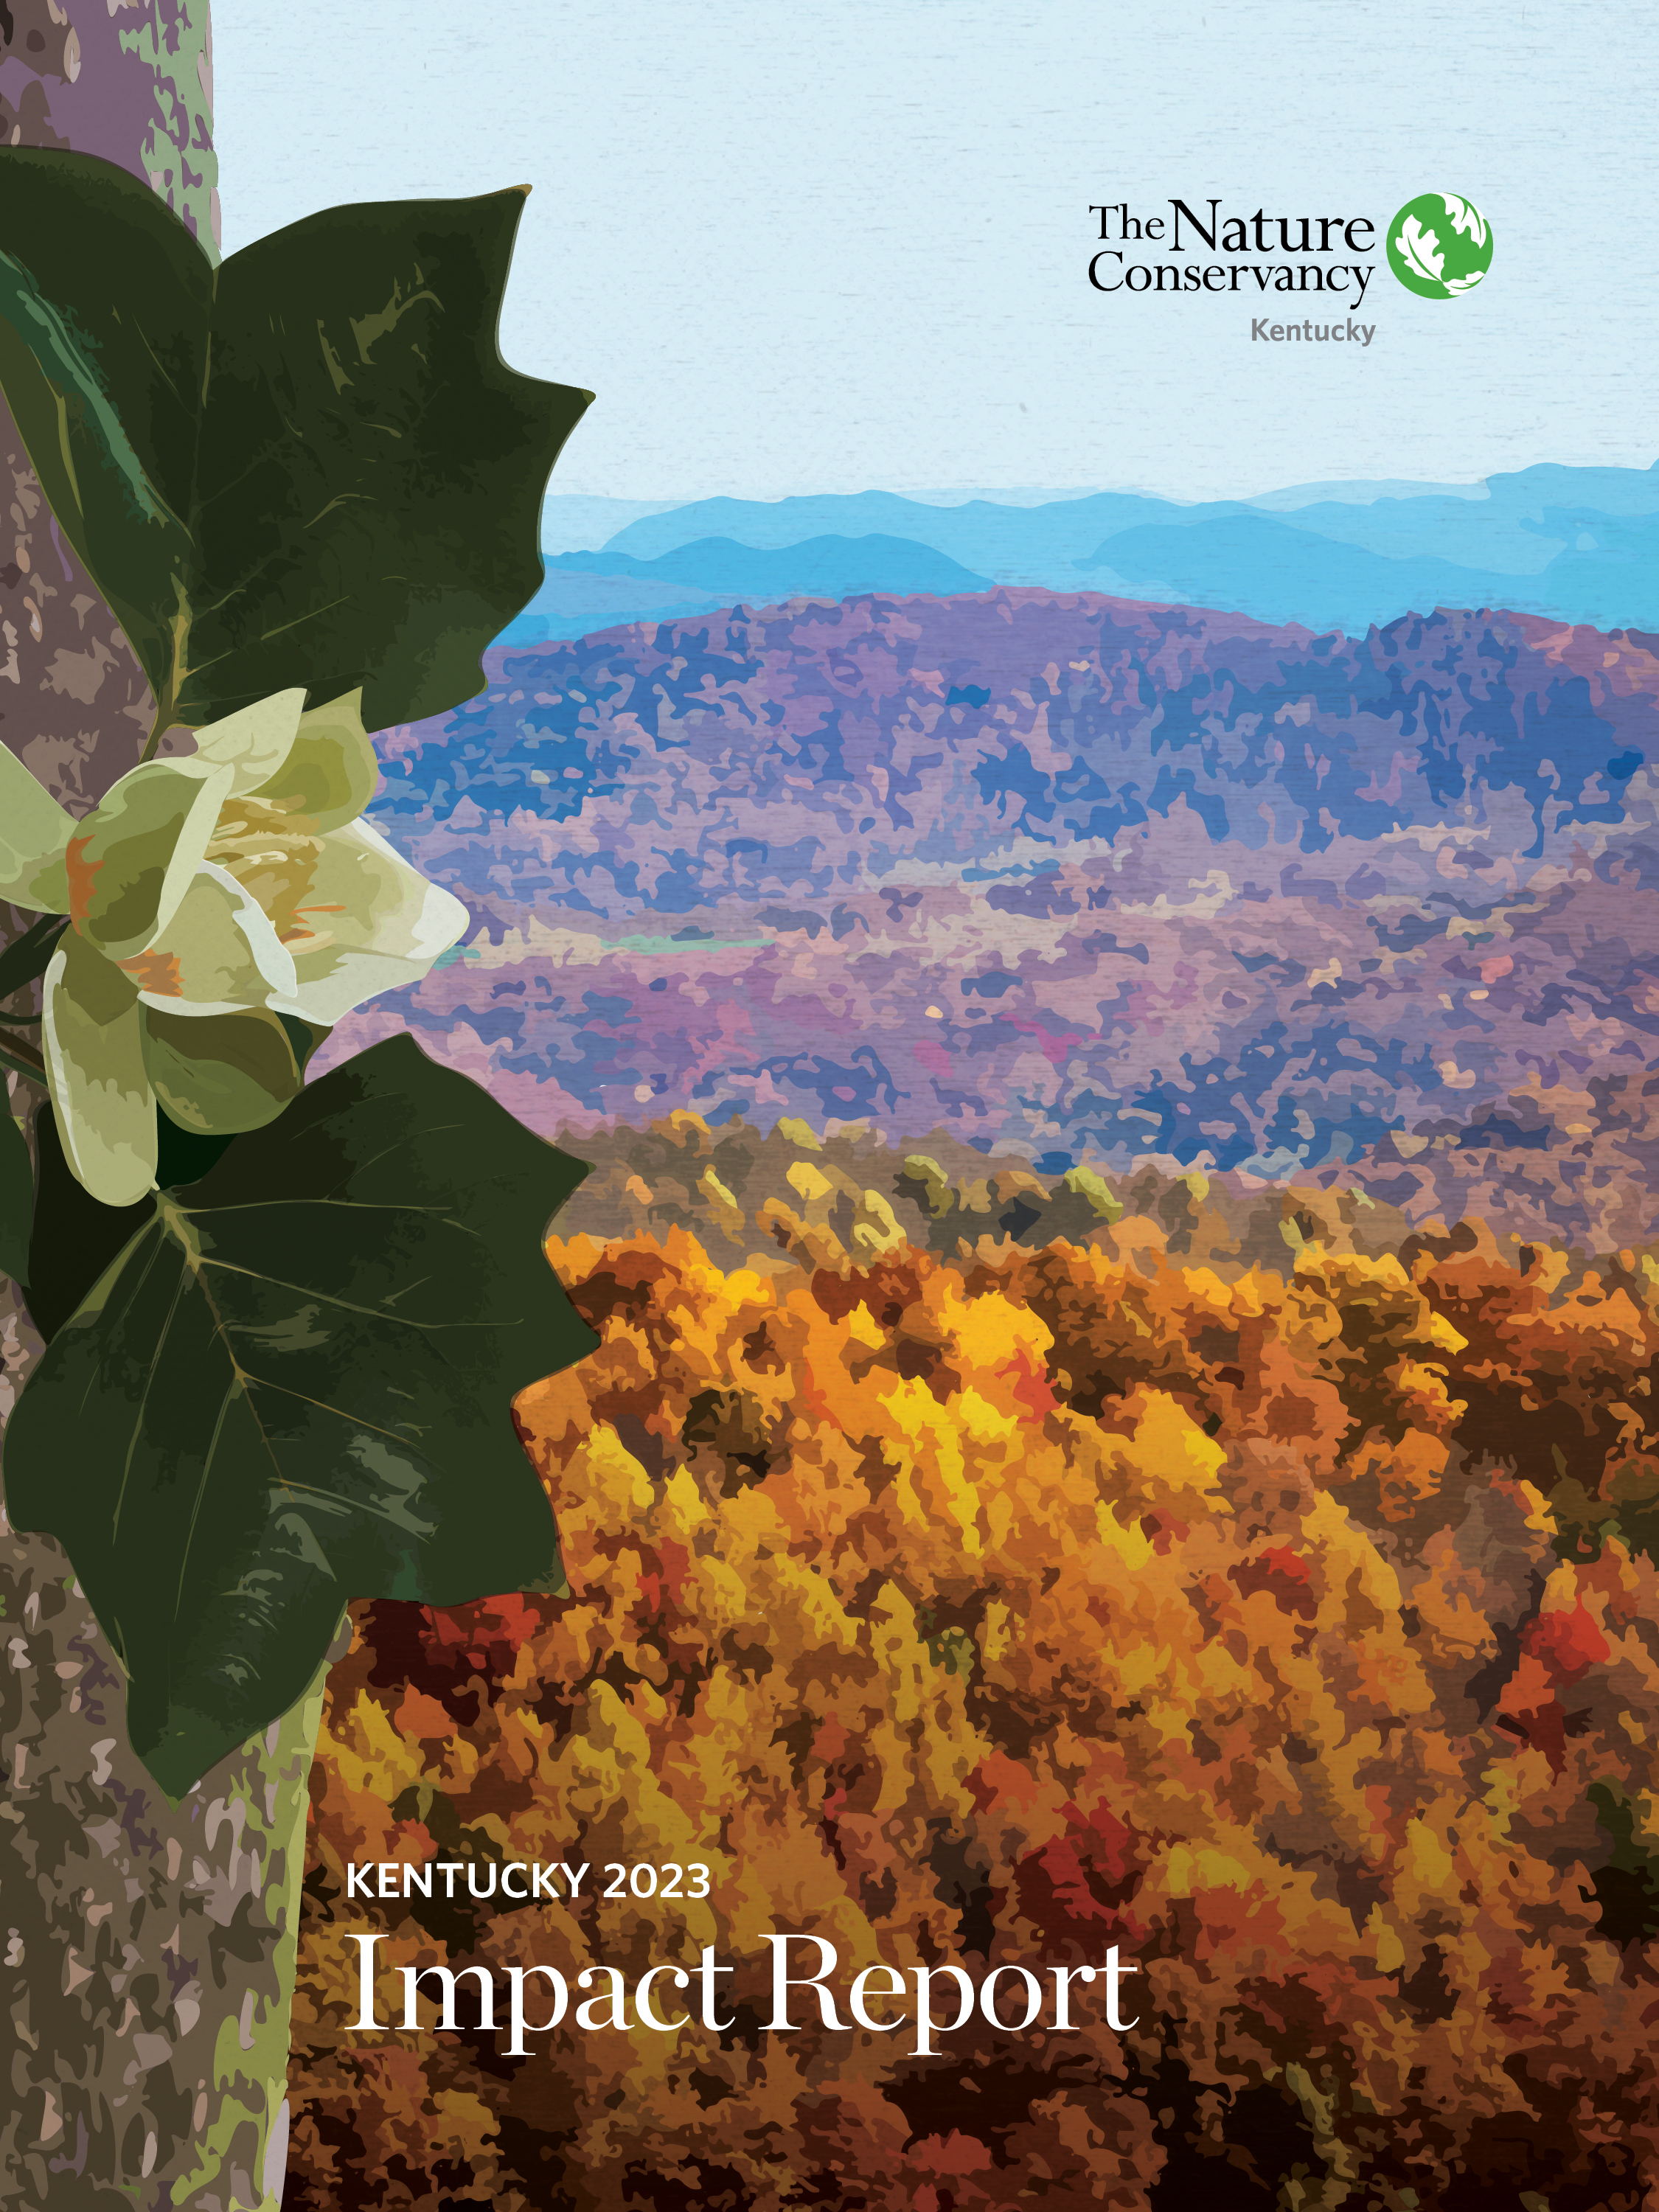 The cover of TNC in Kentucky's 2023 Annual Report.